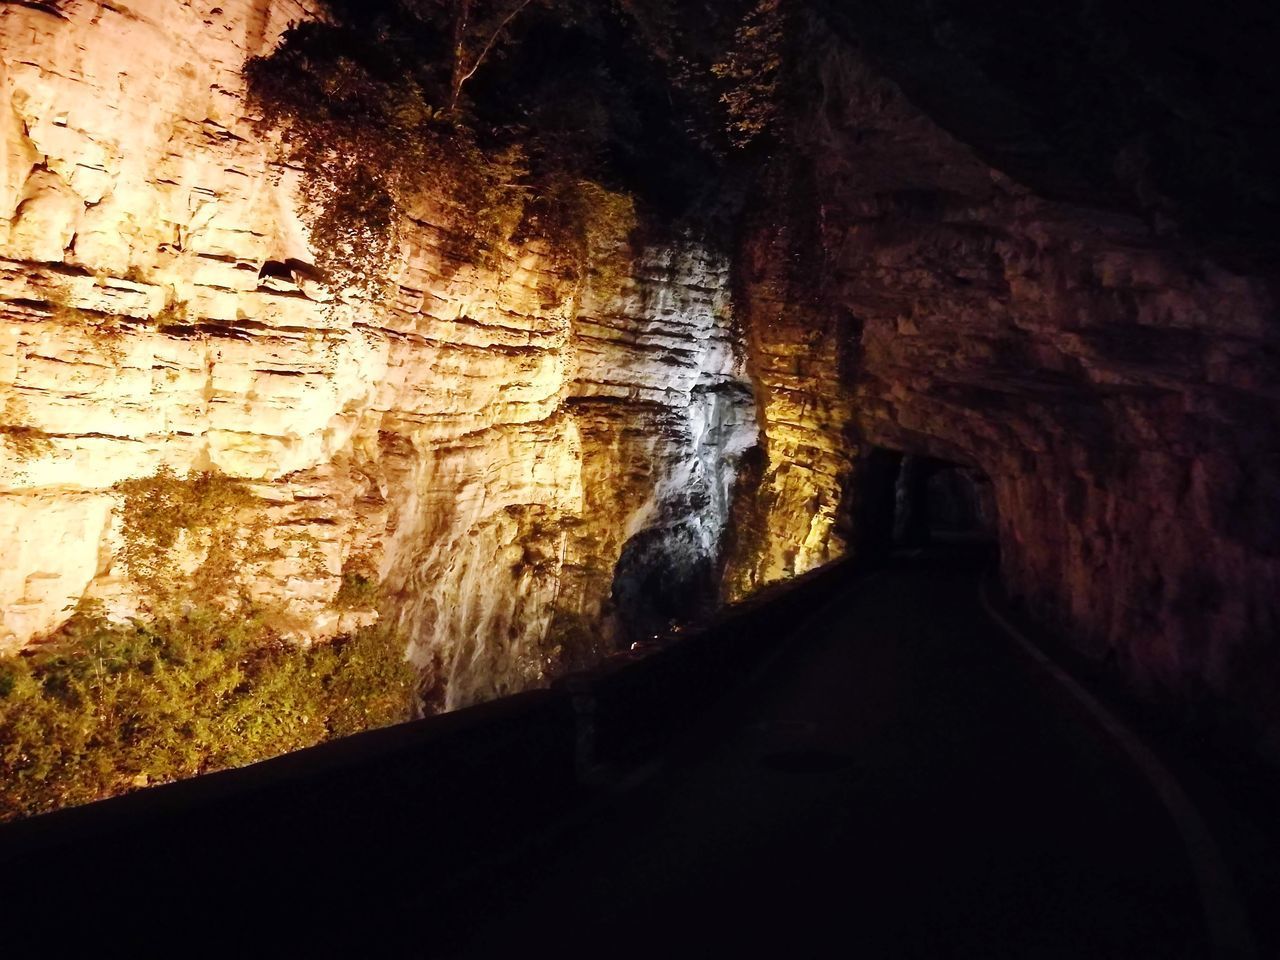 VIEW OF CAVE